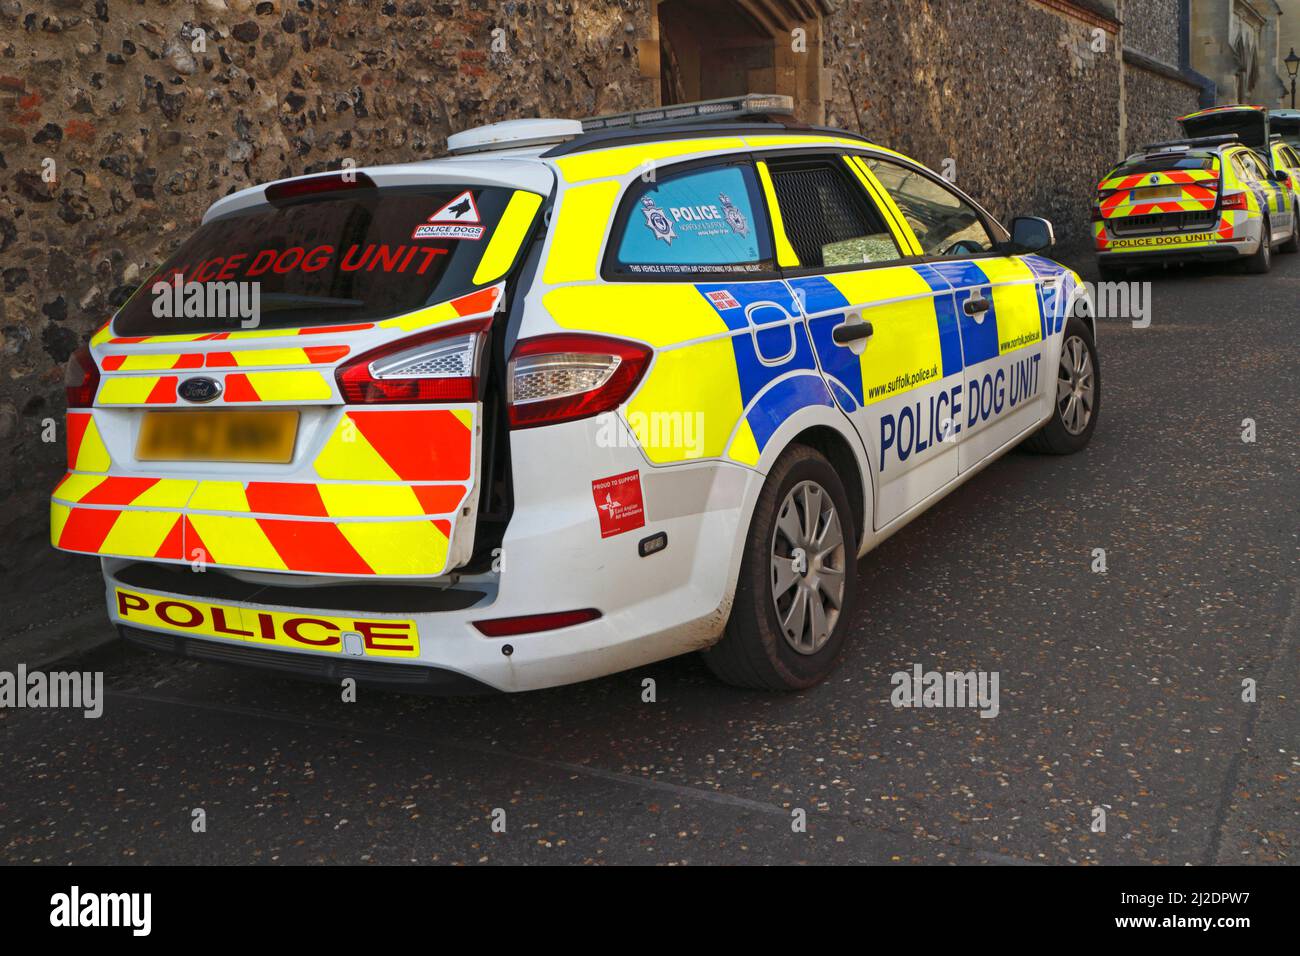 Police Dog Unit cars parked by the Cathedral in the centre of the City of Norwich, Norfolk, England, United Kingdom. Stock Photo